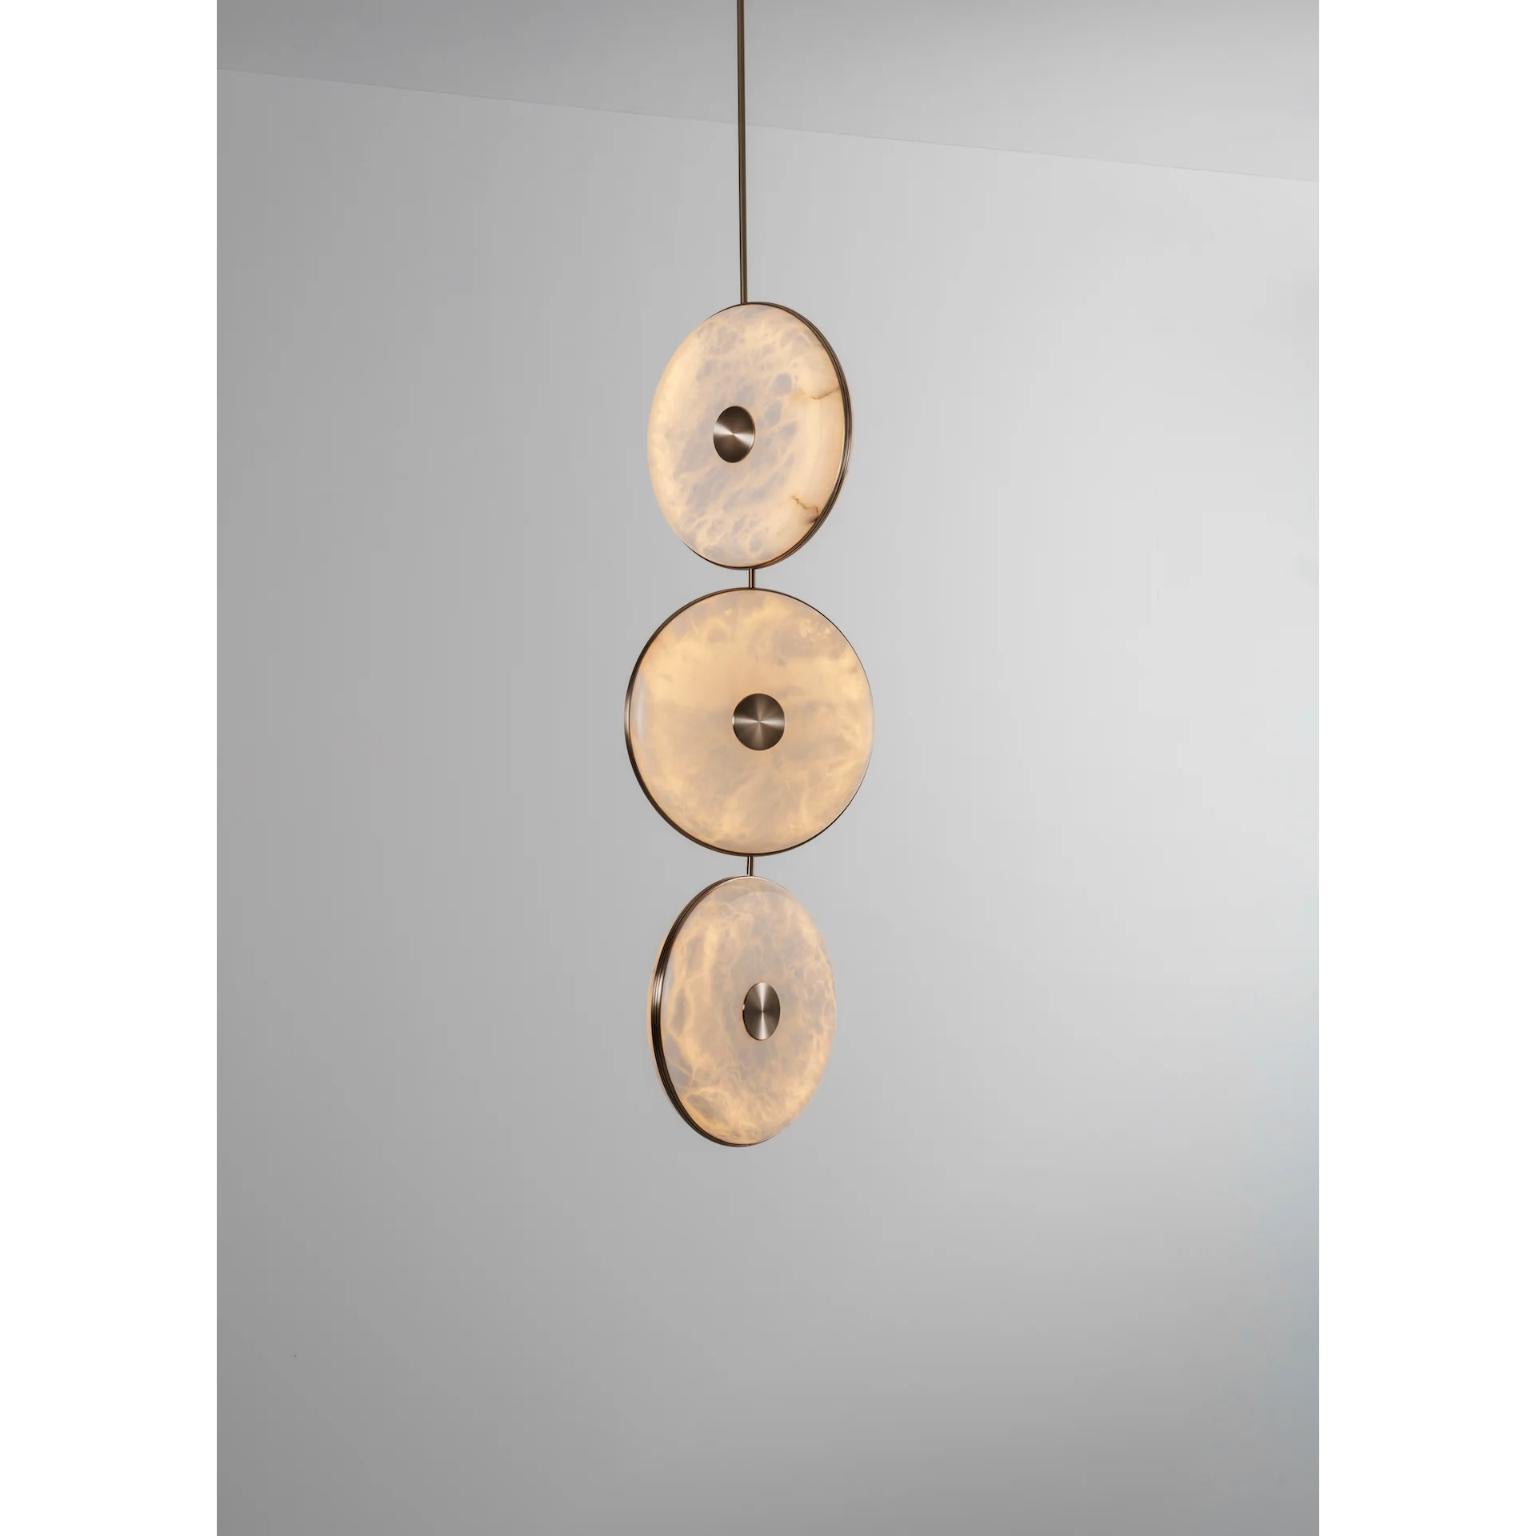 Beran Antique Brass Large Drop 3 Chandelier by Bert Frank
Dimensions: Ø 36 x H 100 cm. 
Materials: Brass and alabaster.

Available in two different sizes. Available in different finishes and materials: Brushed brass, Antique brass, Dark bronze and